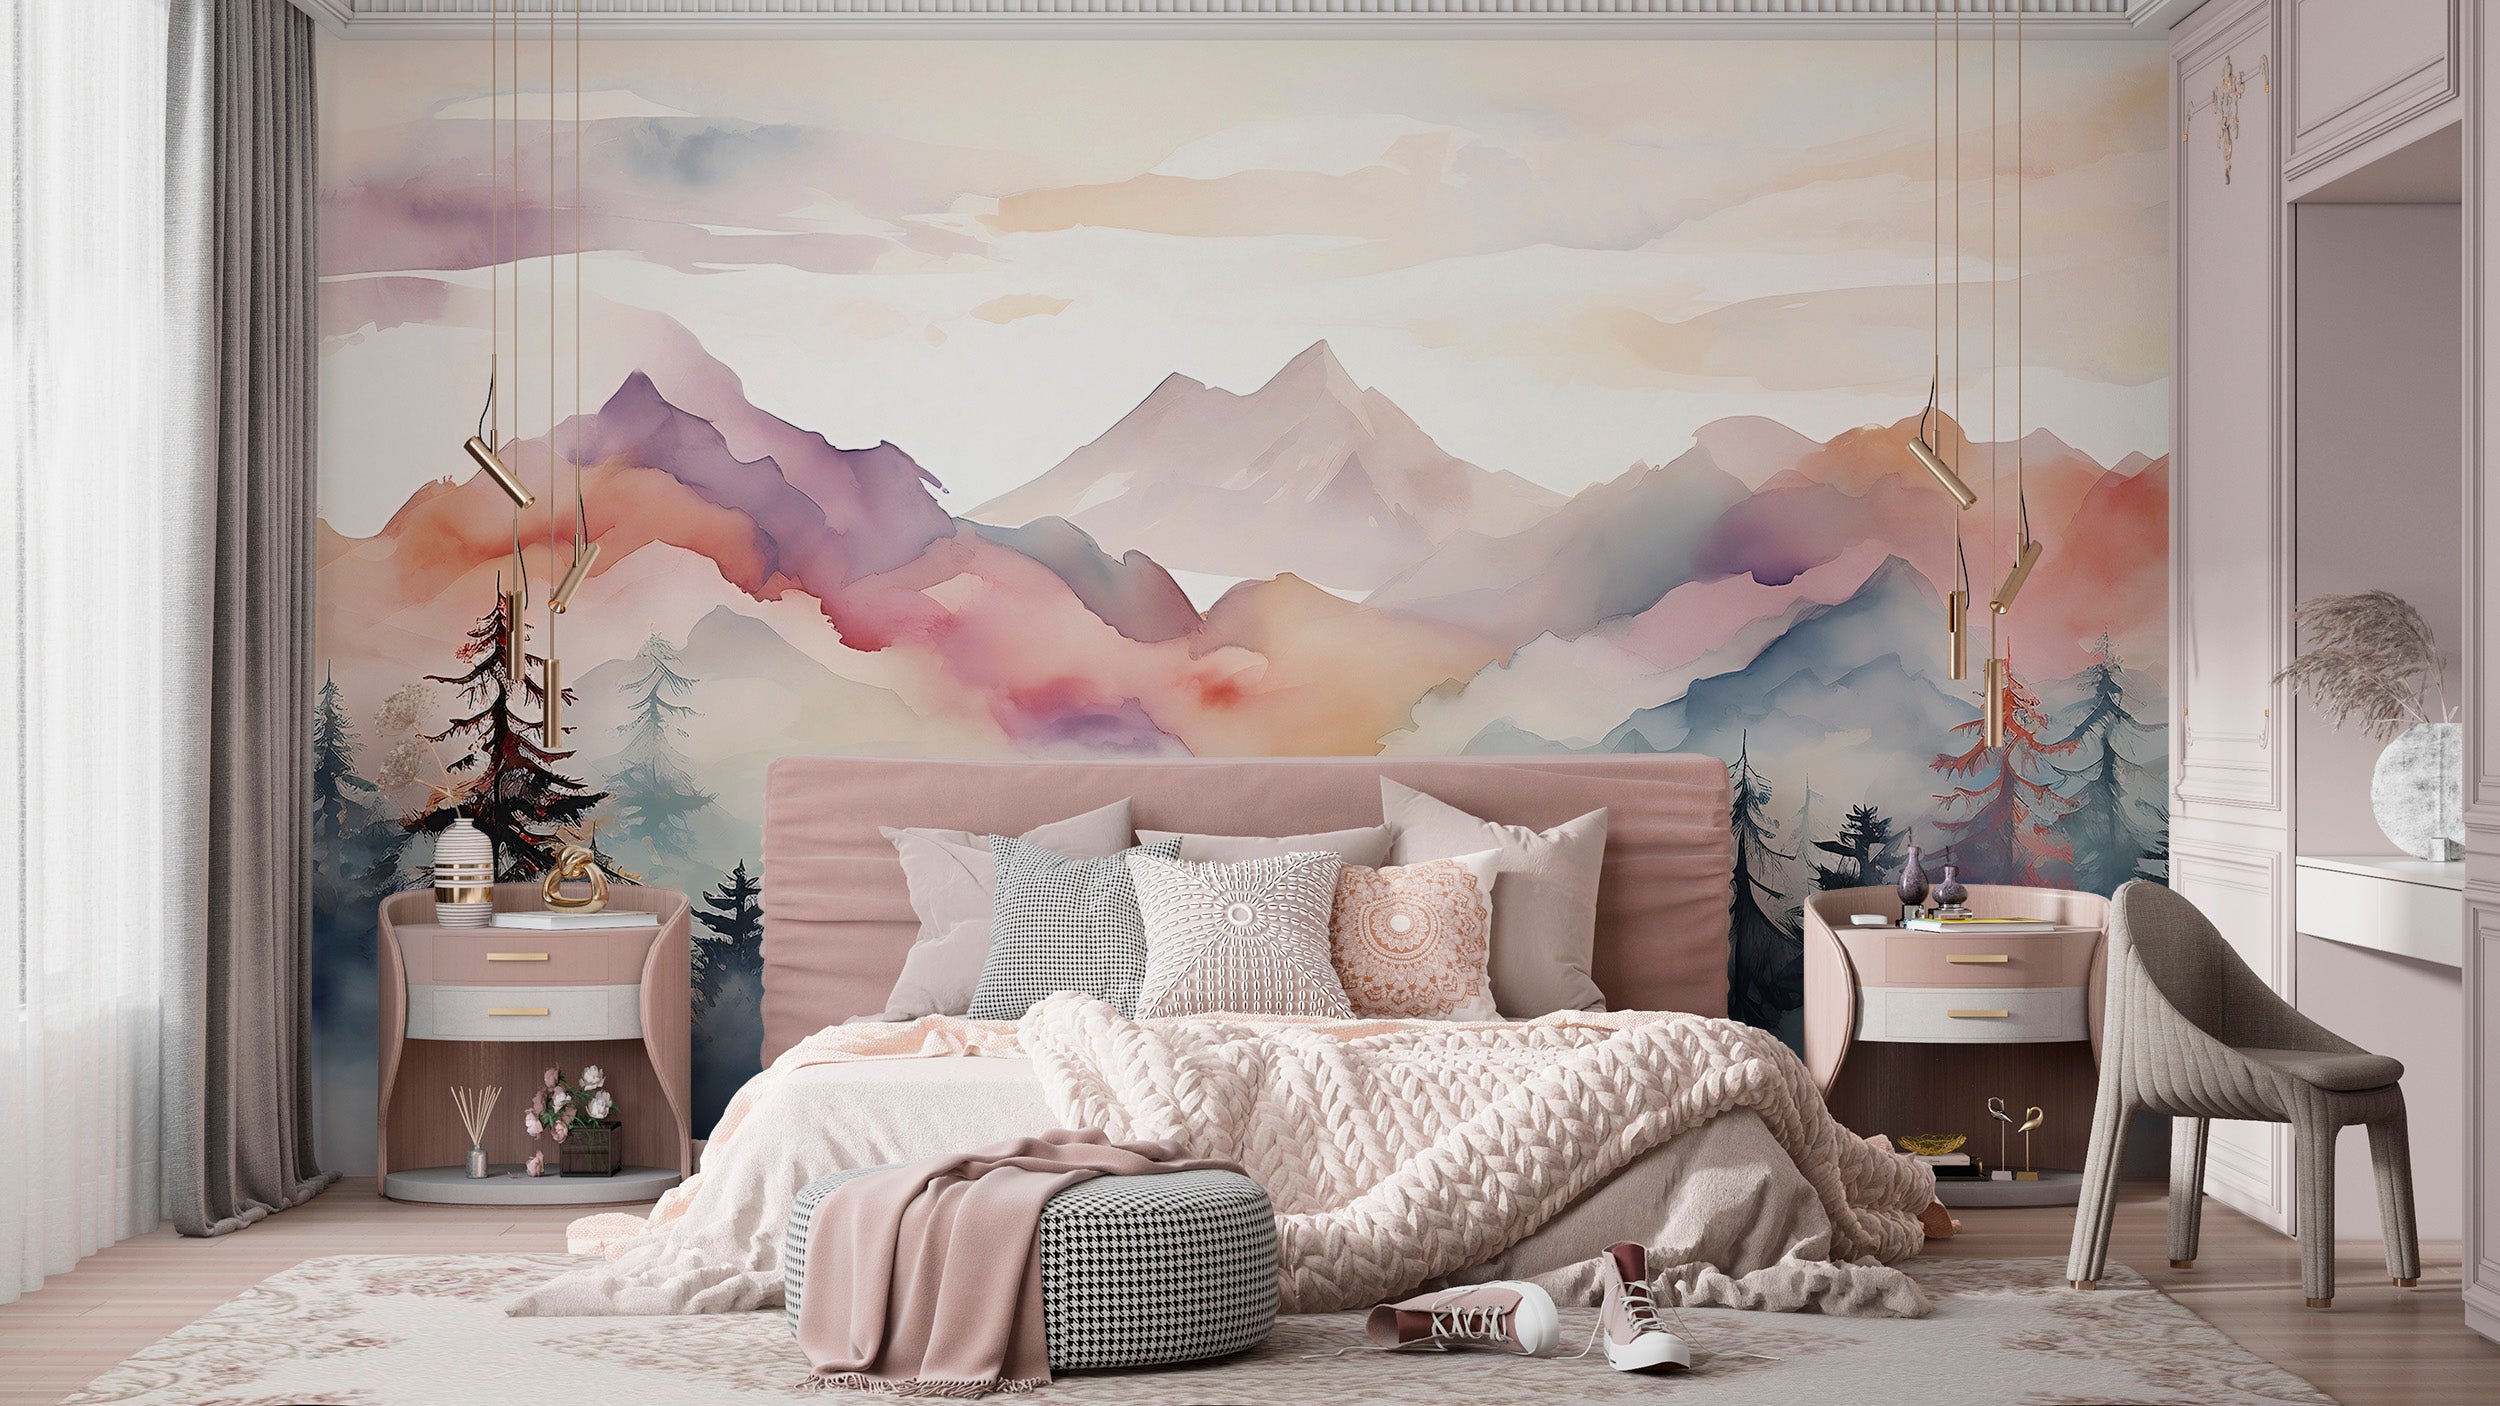 Colorful Mountain Mural Transforming Room Ambiance